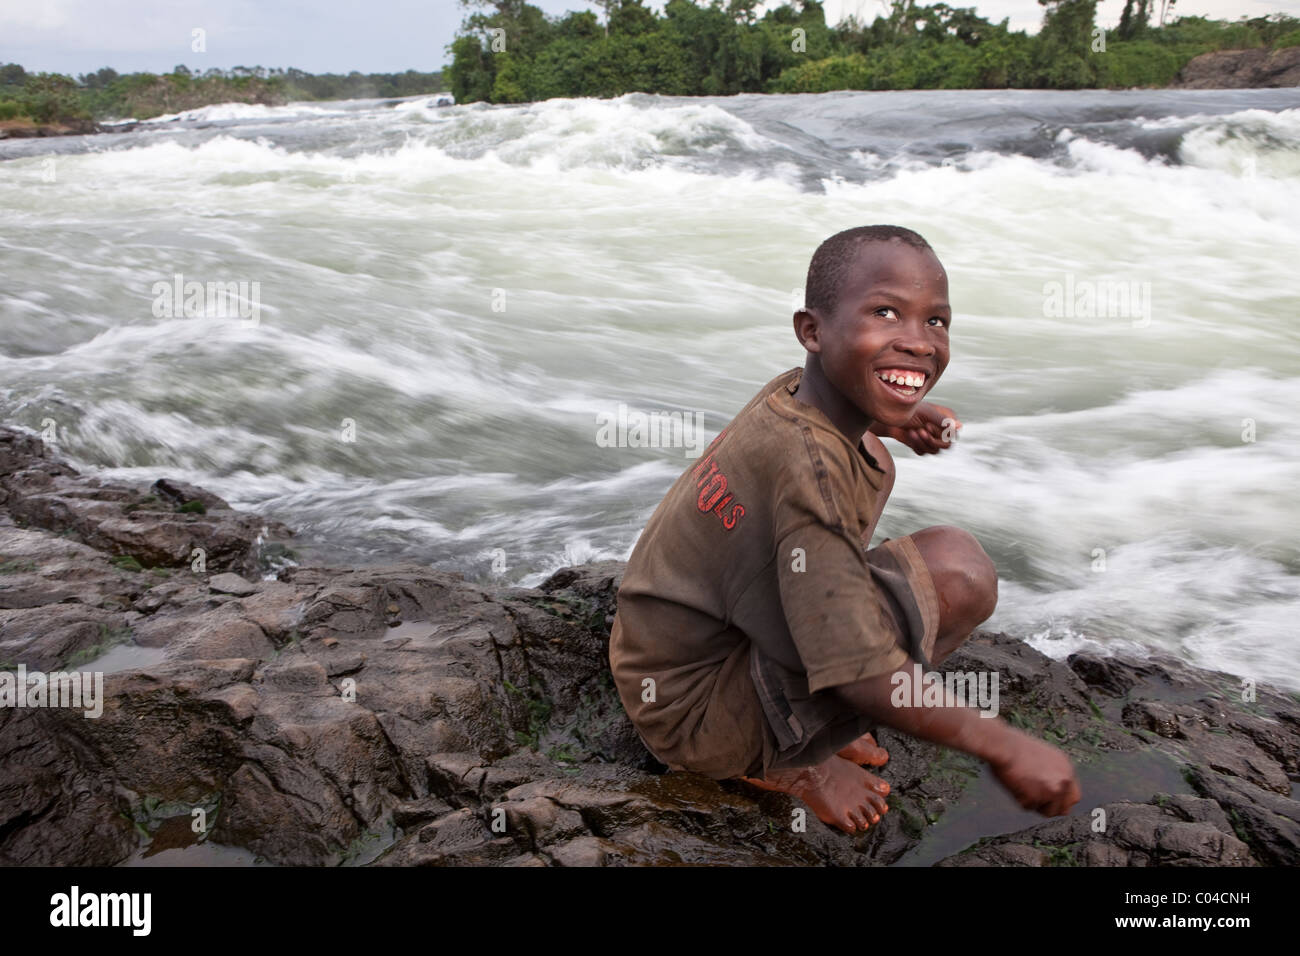 A school boy plays along the shores of the Nile River at Bujagali Falls, Uganda, East Africa. Stock Photo